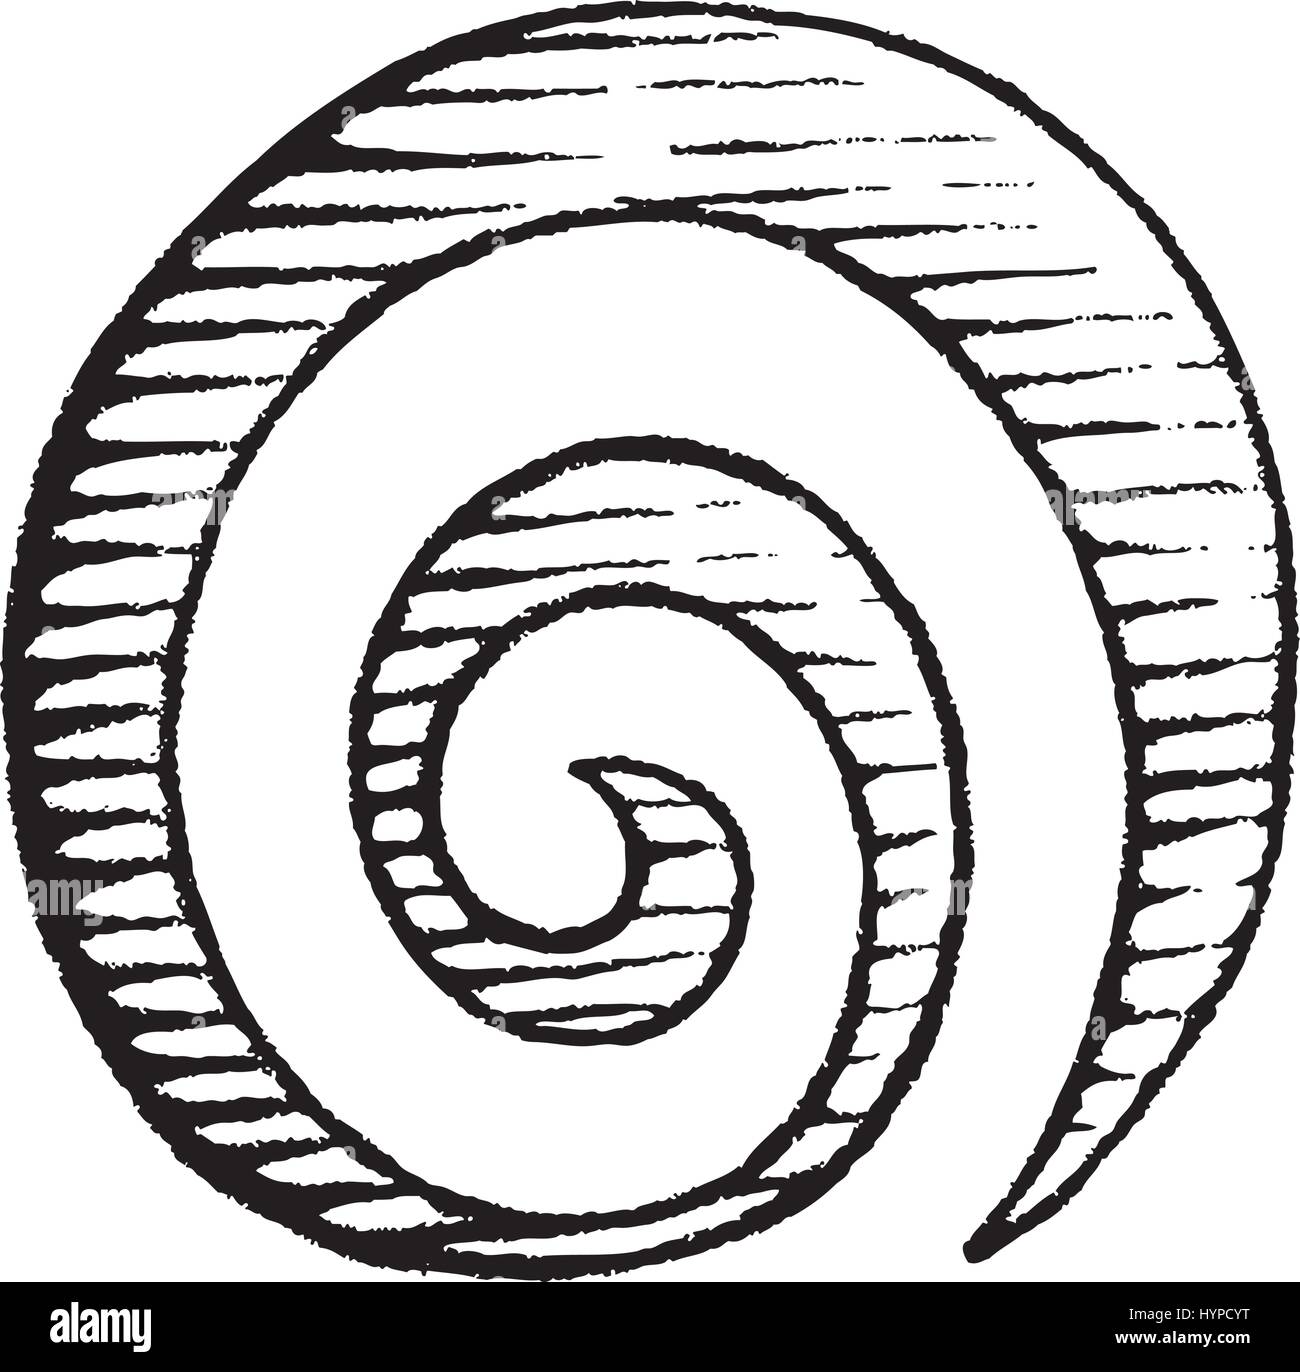 Buy The Art of Spiral Drawing Learn to create spiral art and geometric  drawings using pencil pen and more Book Online at Low Prices in India   The Art of Spiral Drawing